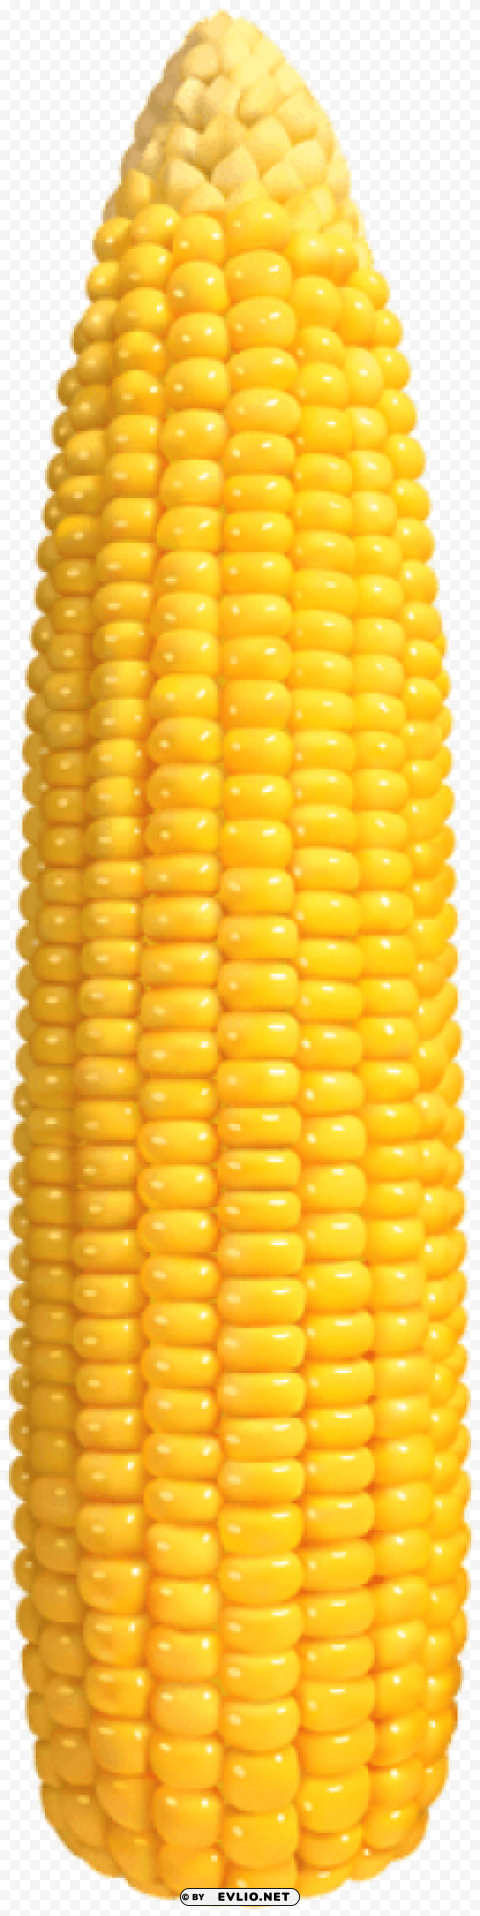 corn Clean Background Isolated PNG Graphic Detail